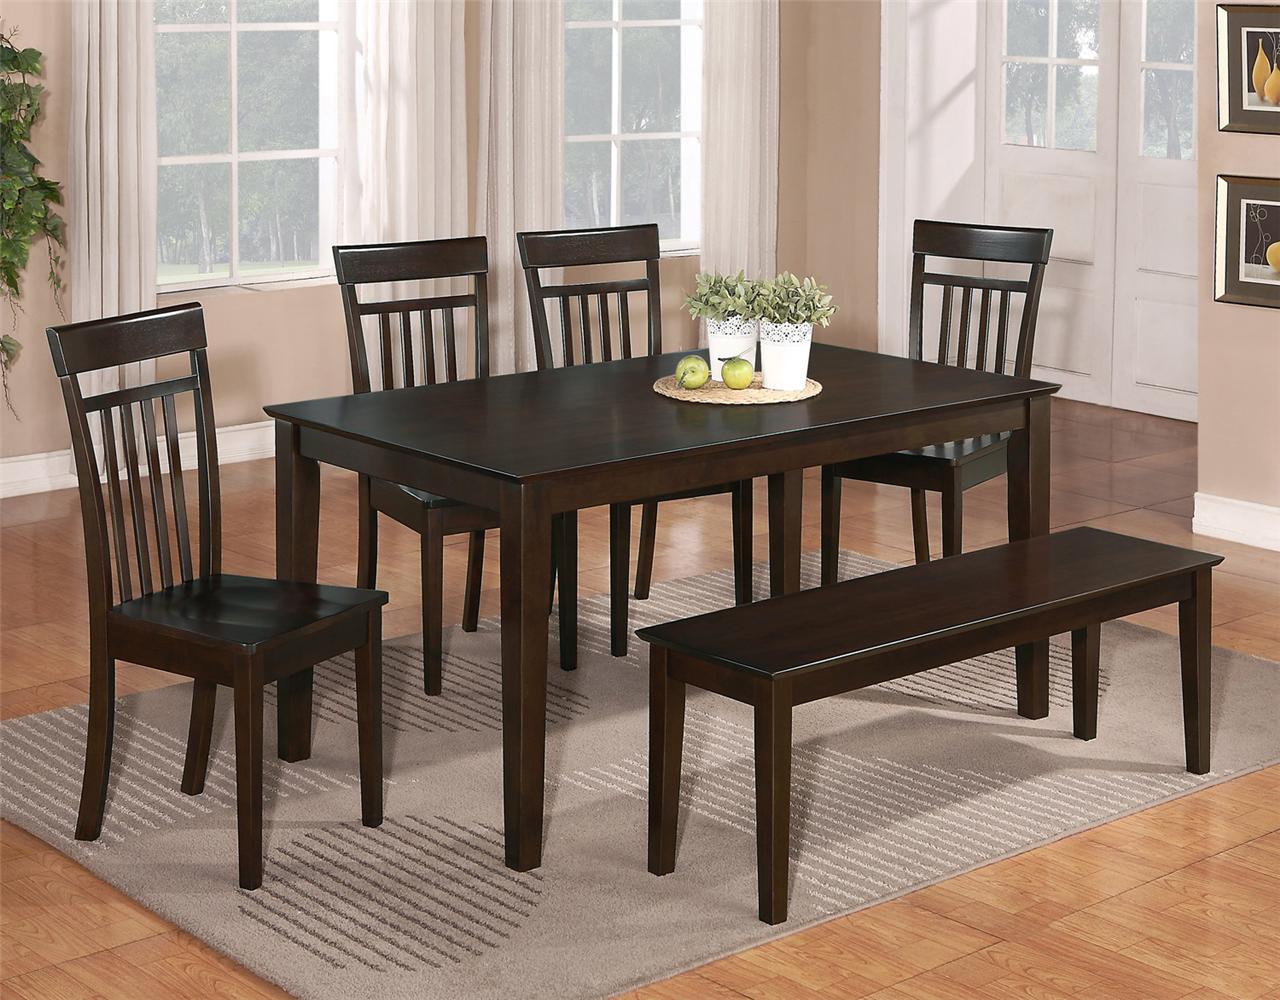 6 PC DINETTE KITCHEN DINING ROOM SET TABLE w/4 WOOD CHAIR ...
